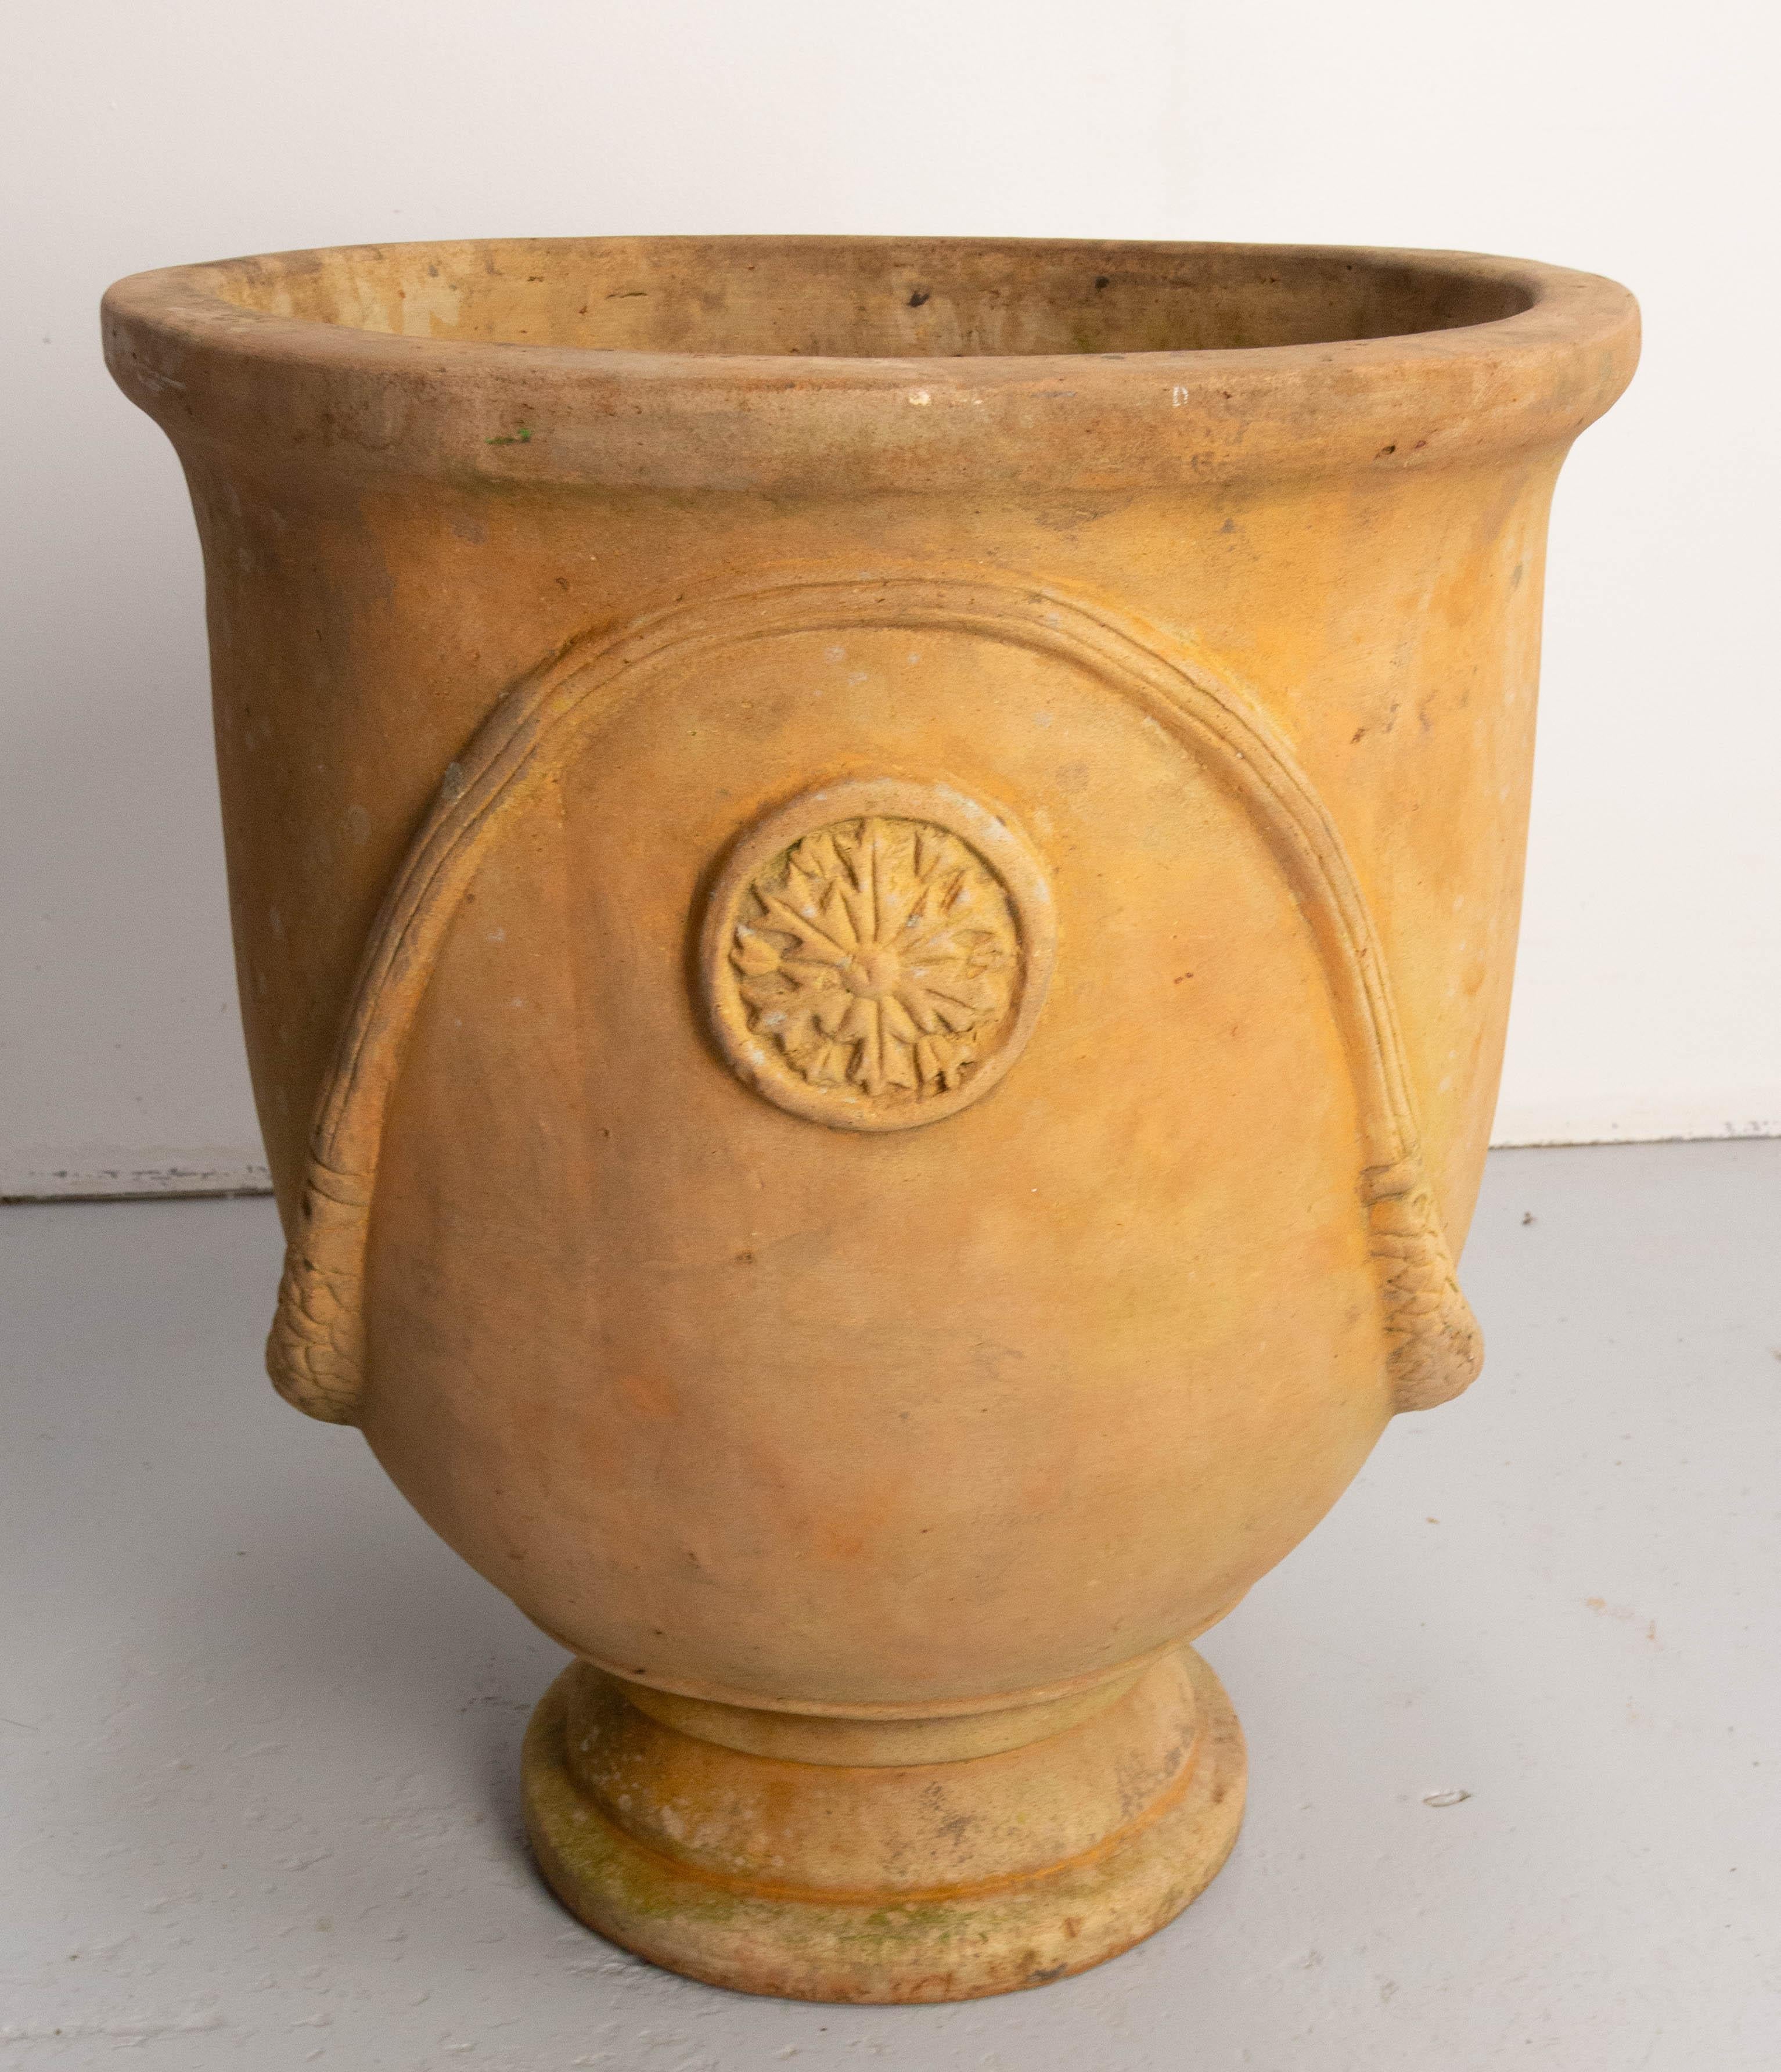 This terracotta planter is made is the Anduze style from the Boisset brothers manufacture. 
This type of vase has been made by the Boisset family at Anduze in the South of France for four centuries. A Cévennes potter was inspired by Medicis vases at